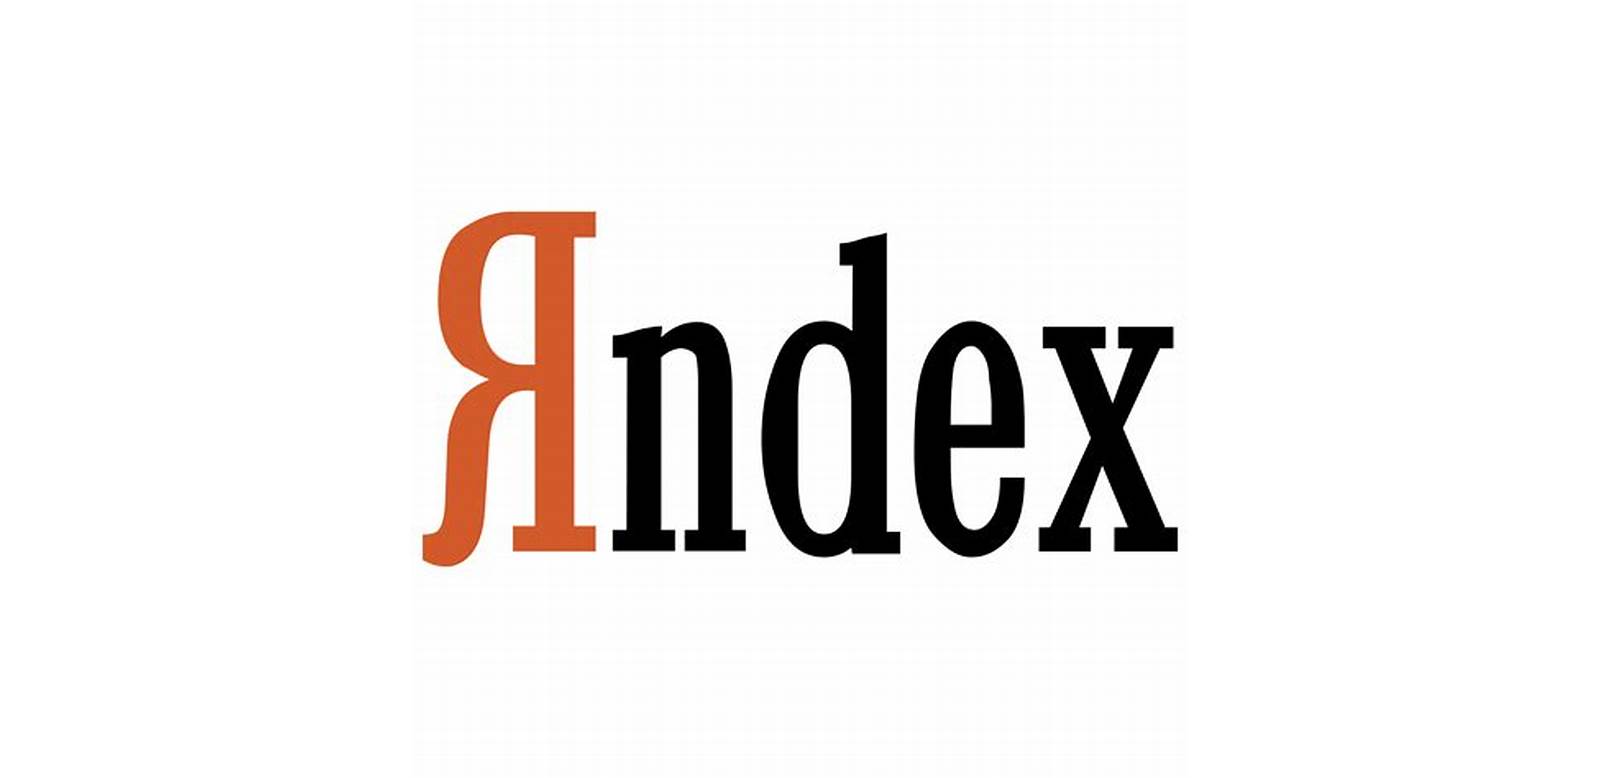 Exploring the Features of Yandex in Indonesia